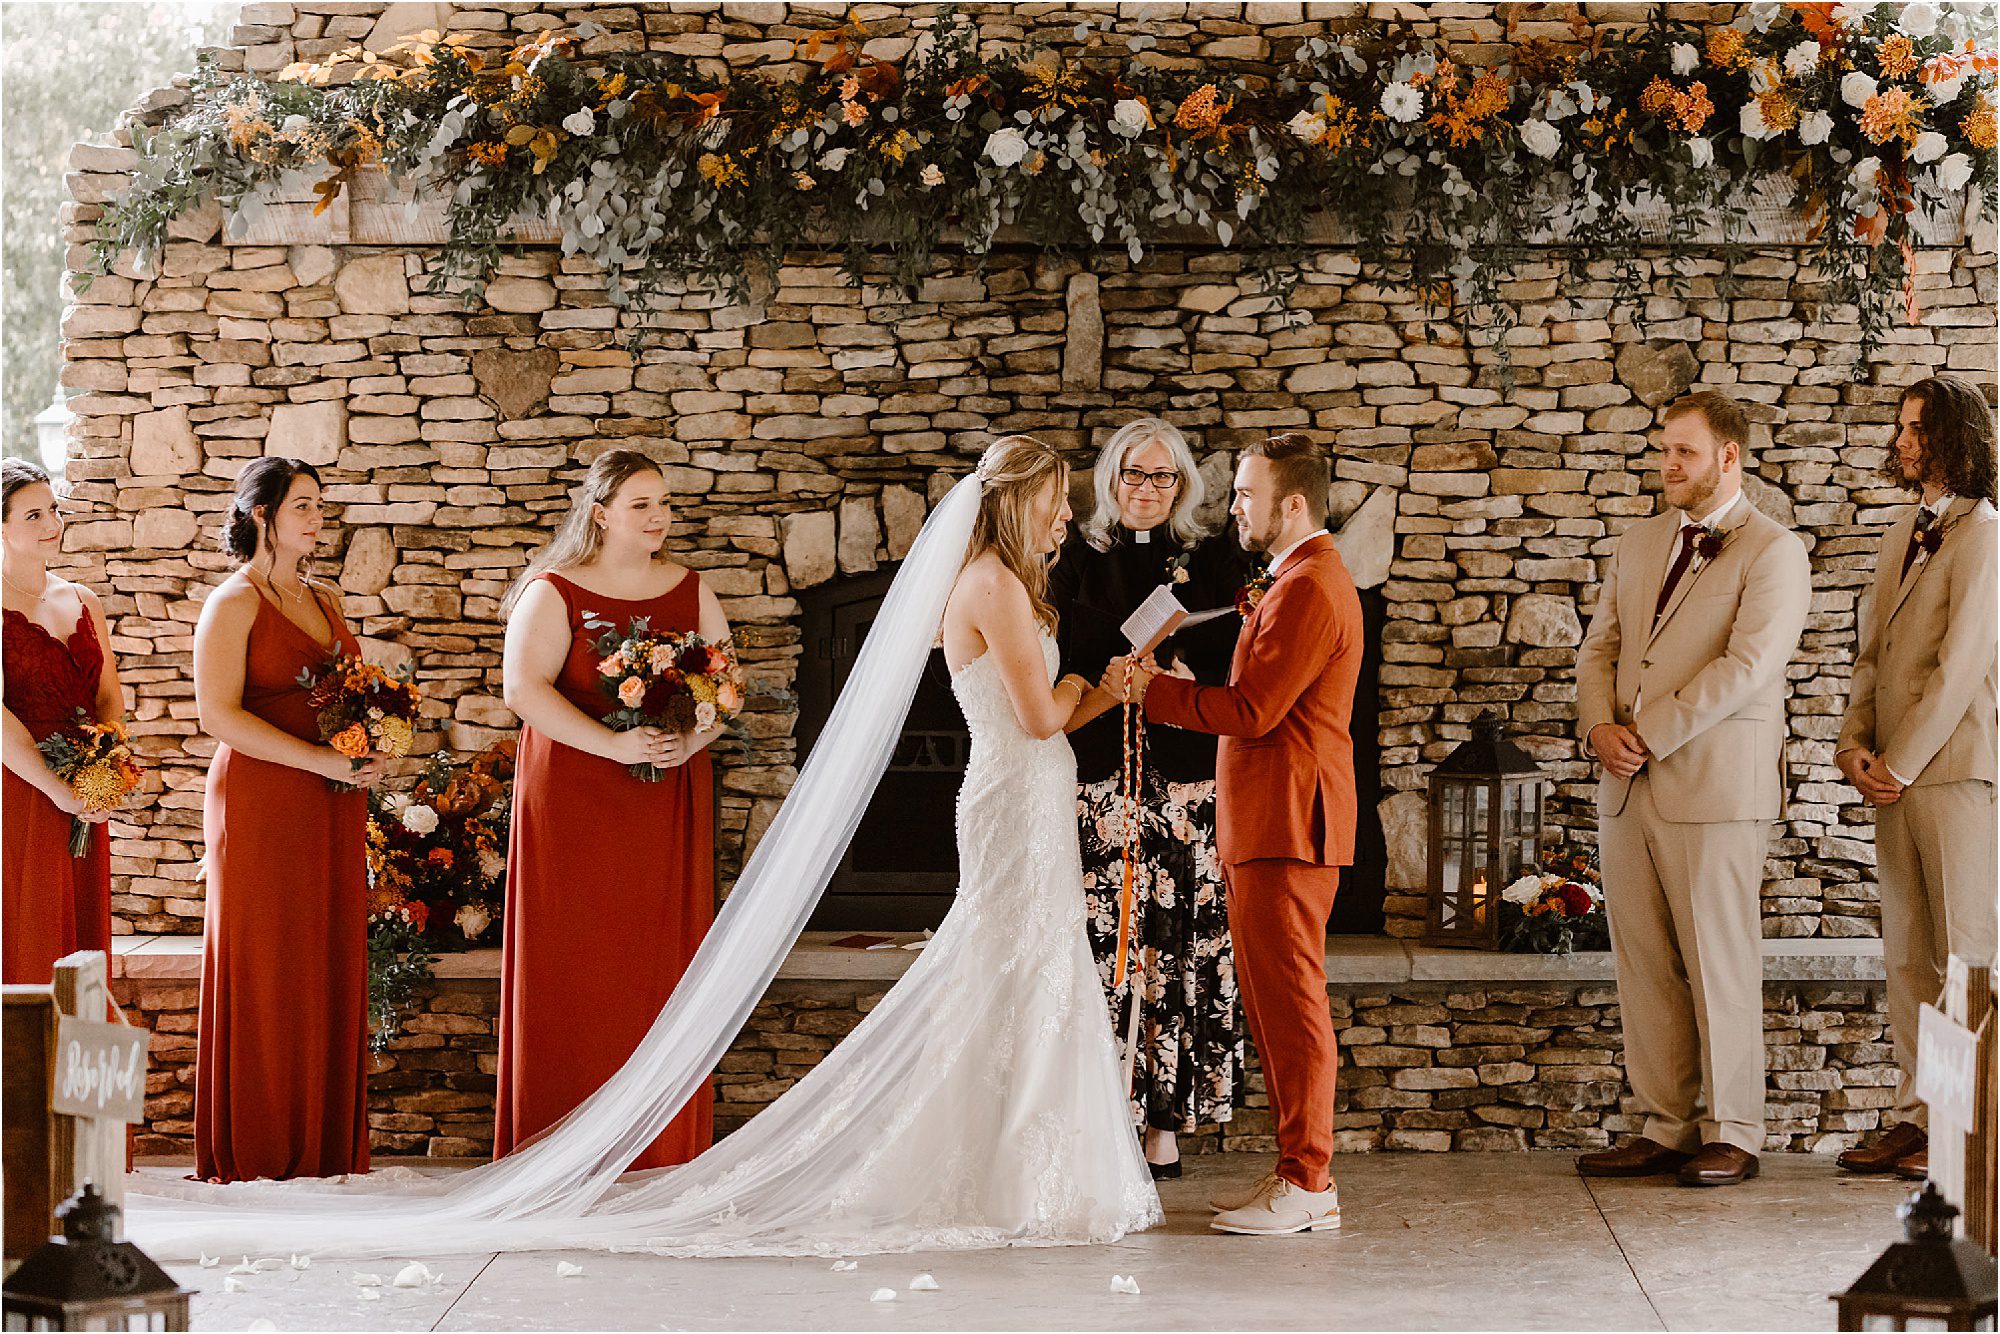 Rich Colors Abound This Fall Wedding in Tennessee